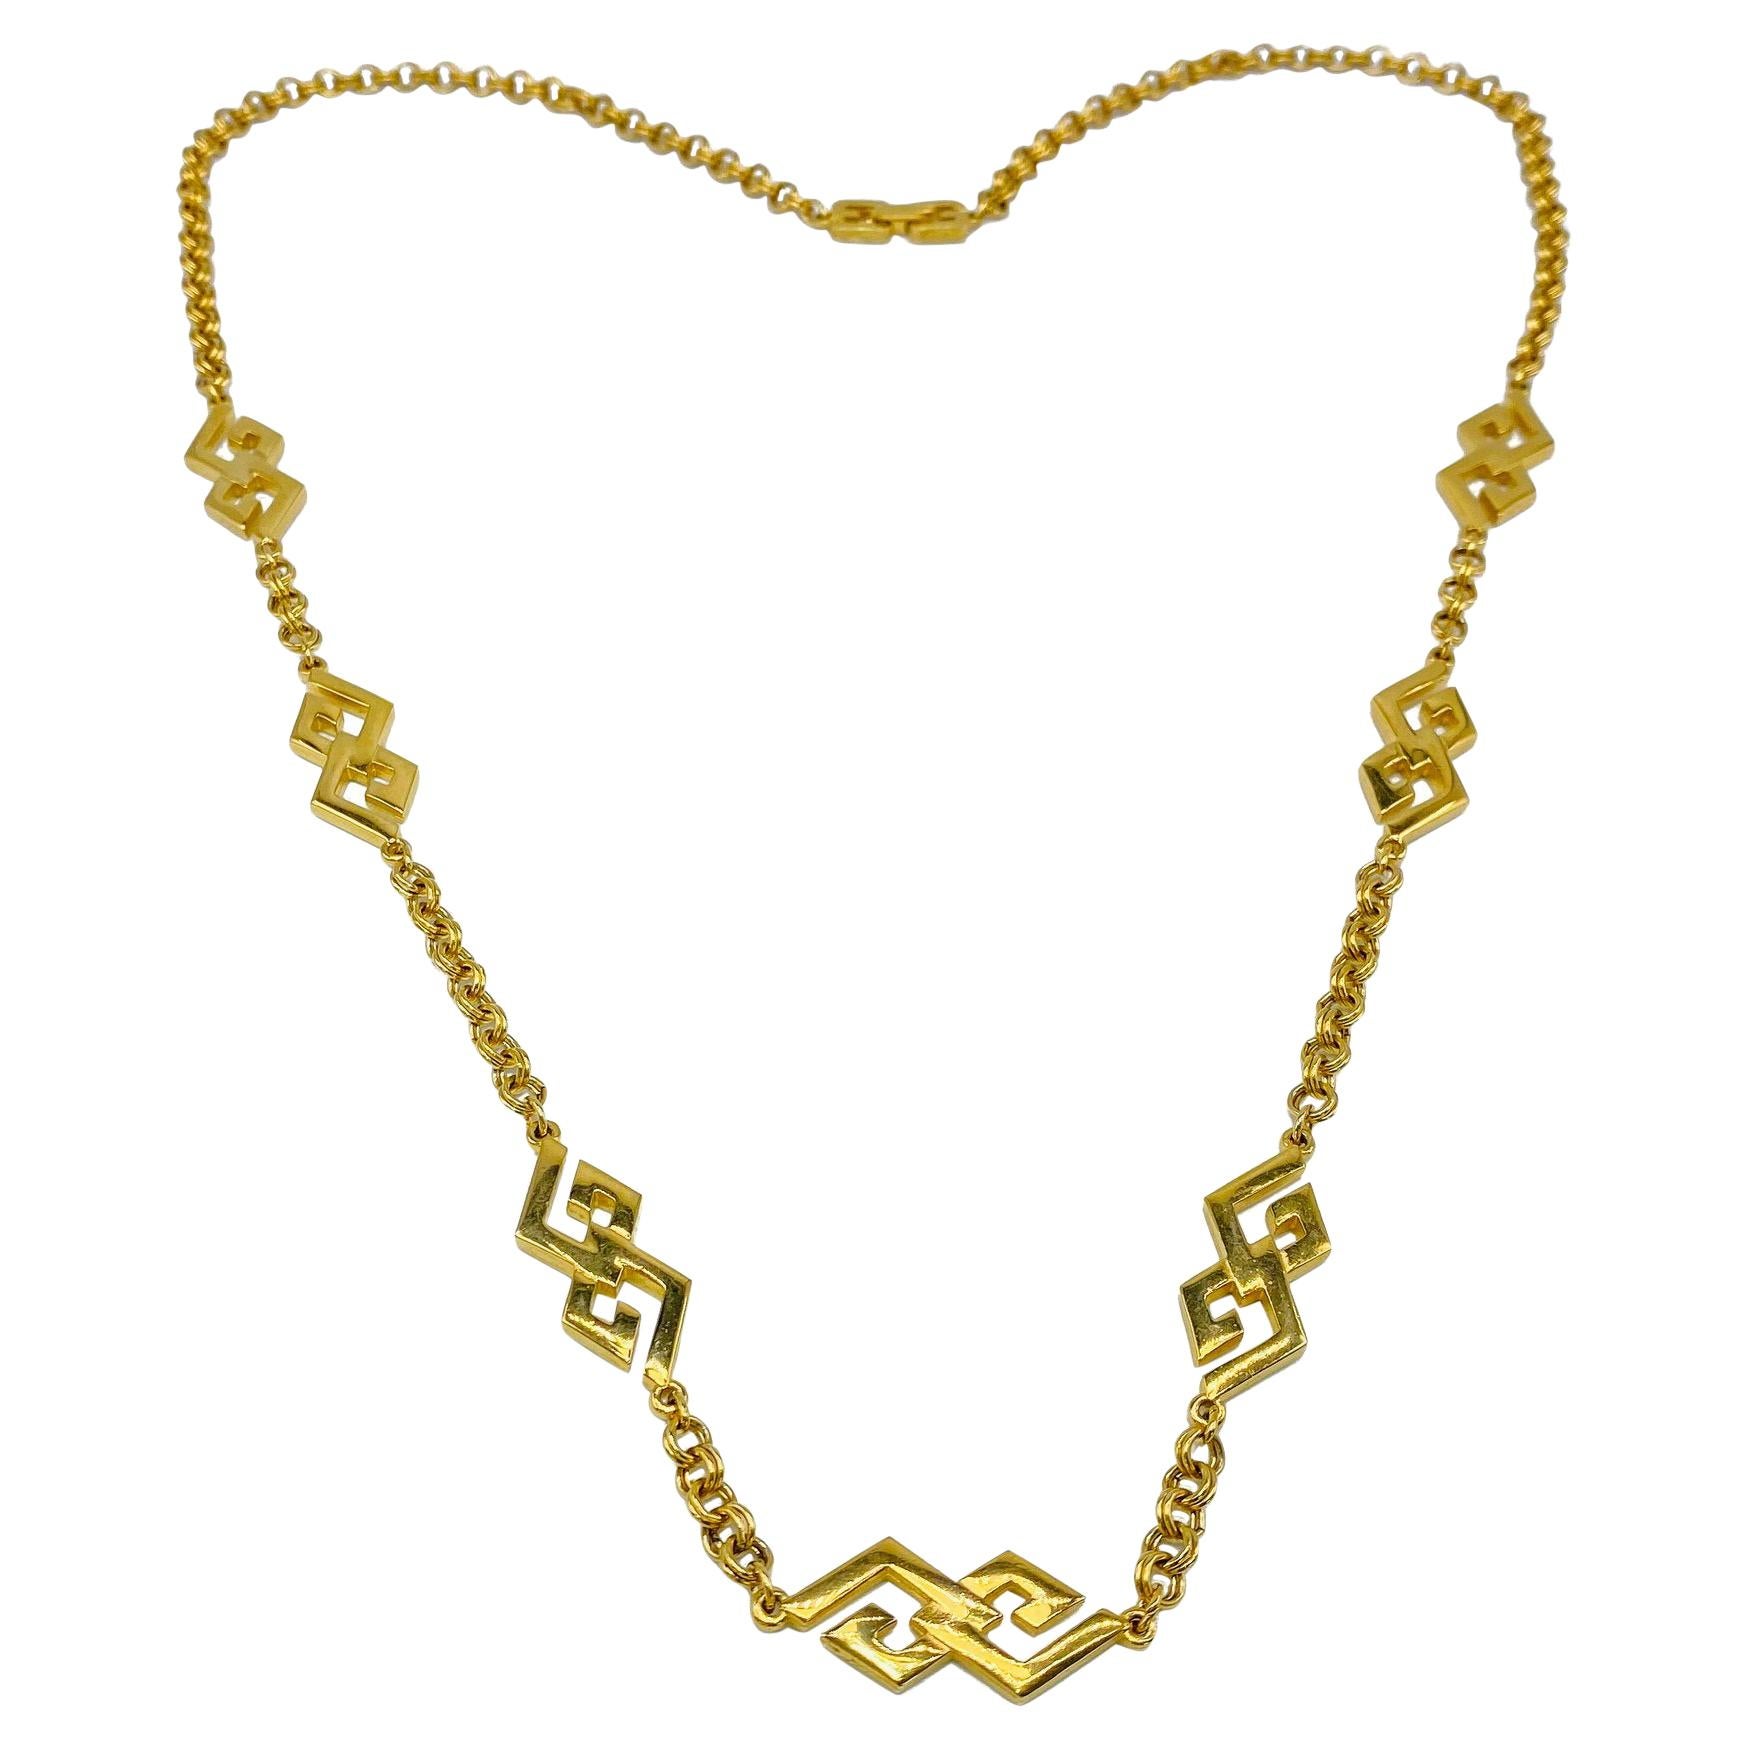 Vintage Givenchy Gold Plated Chain Necklace 1980s